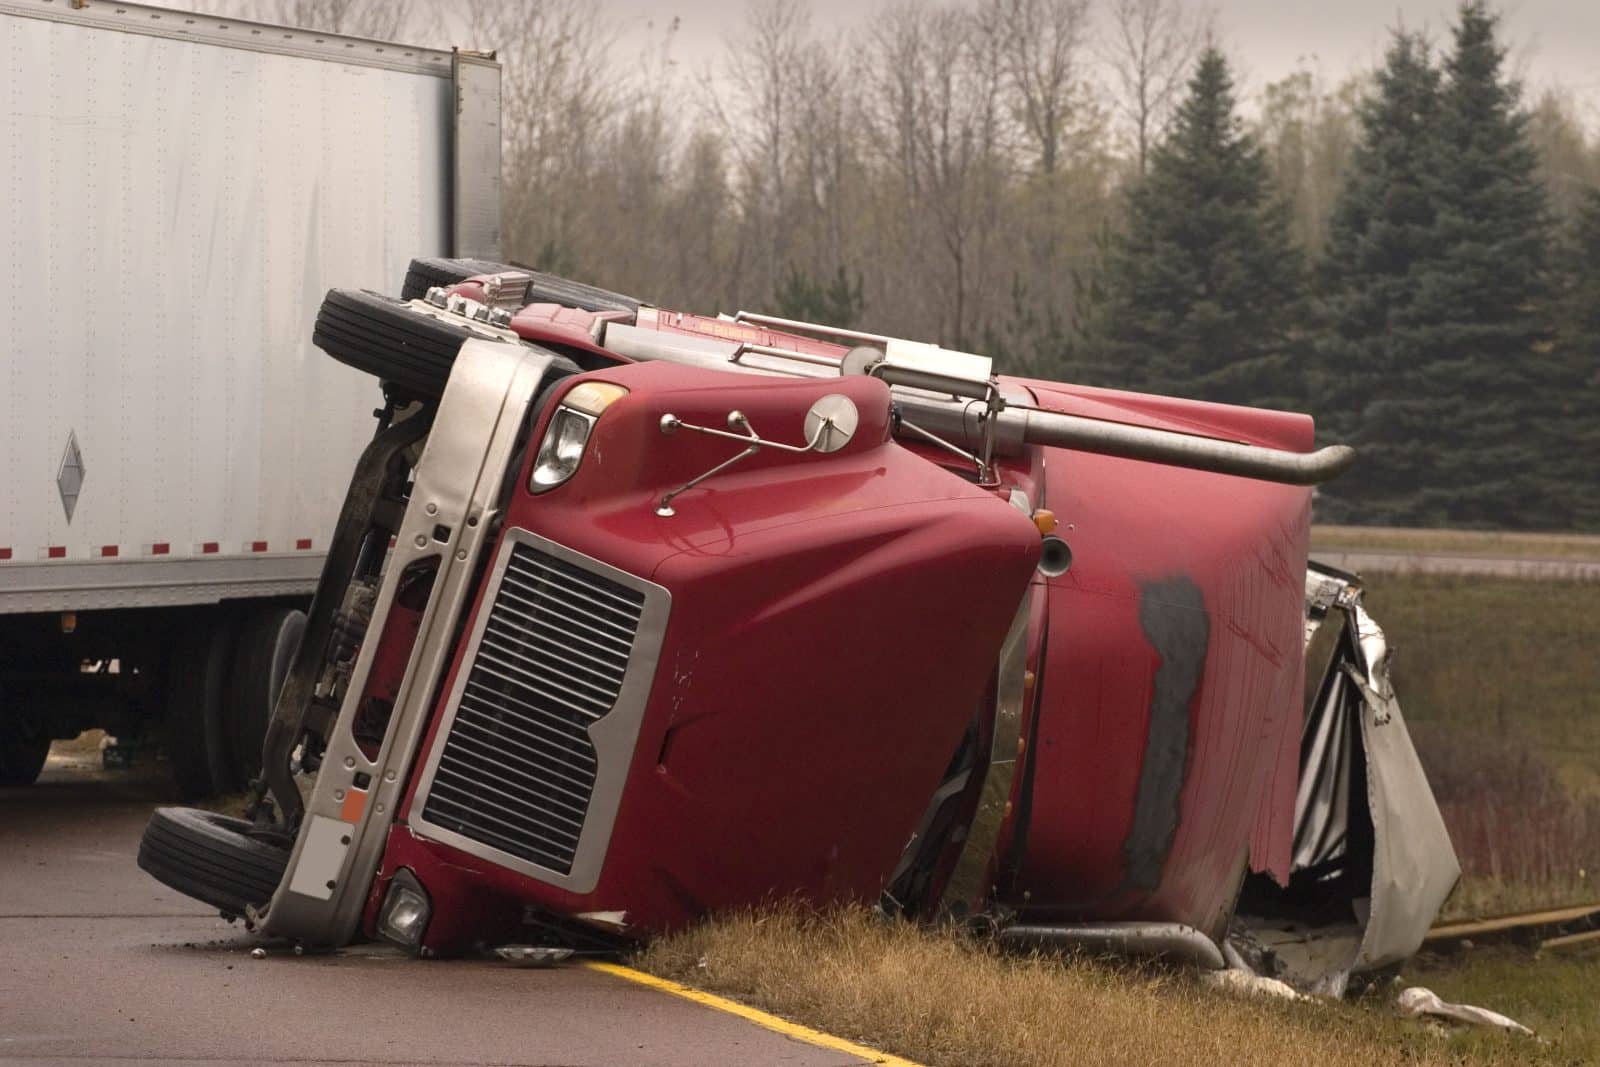 The scene of a truck accident on the interstate.